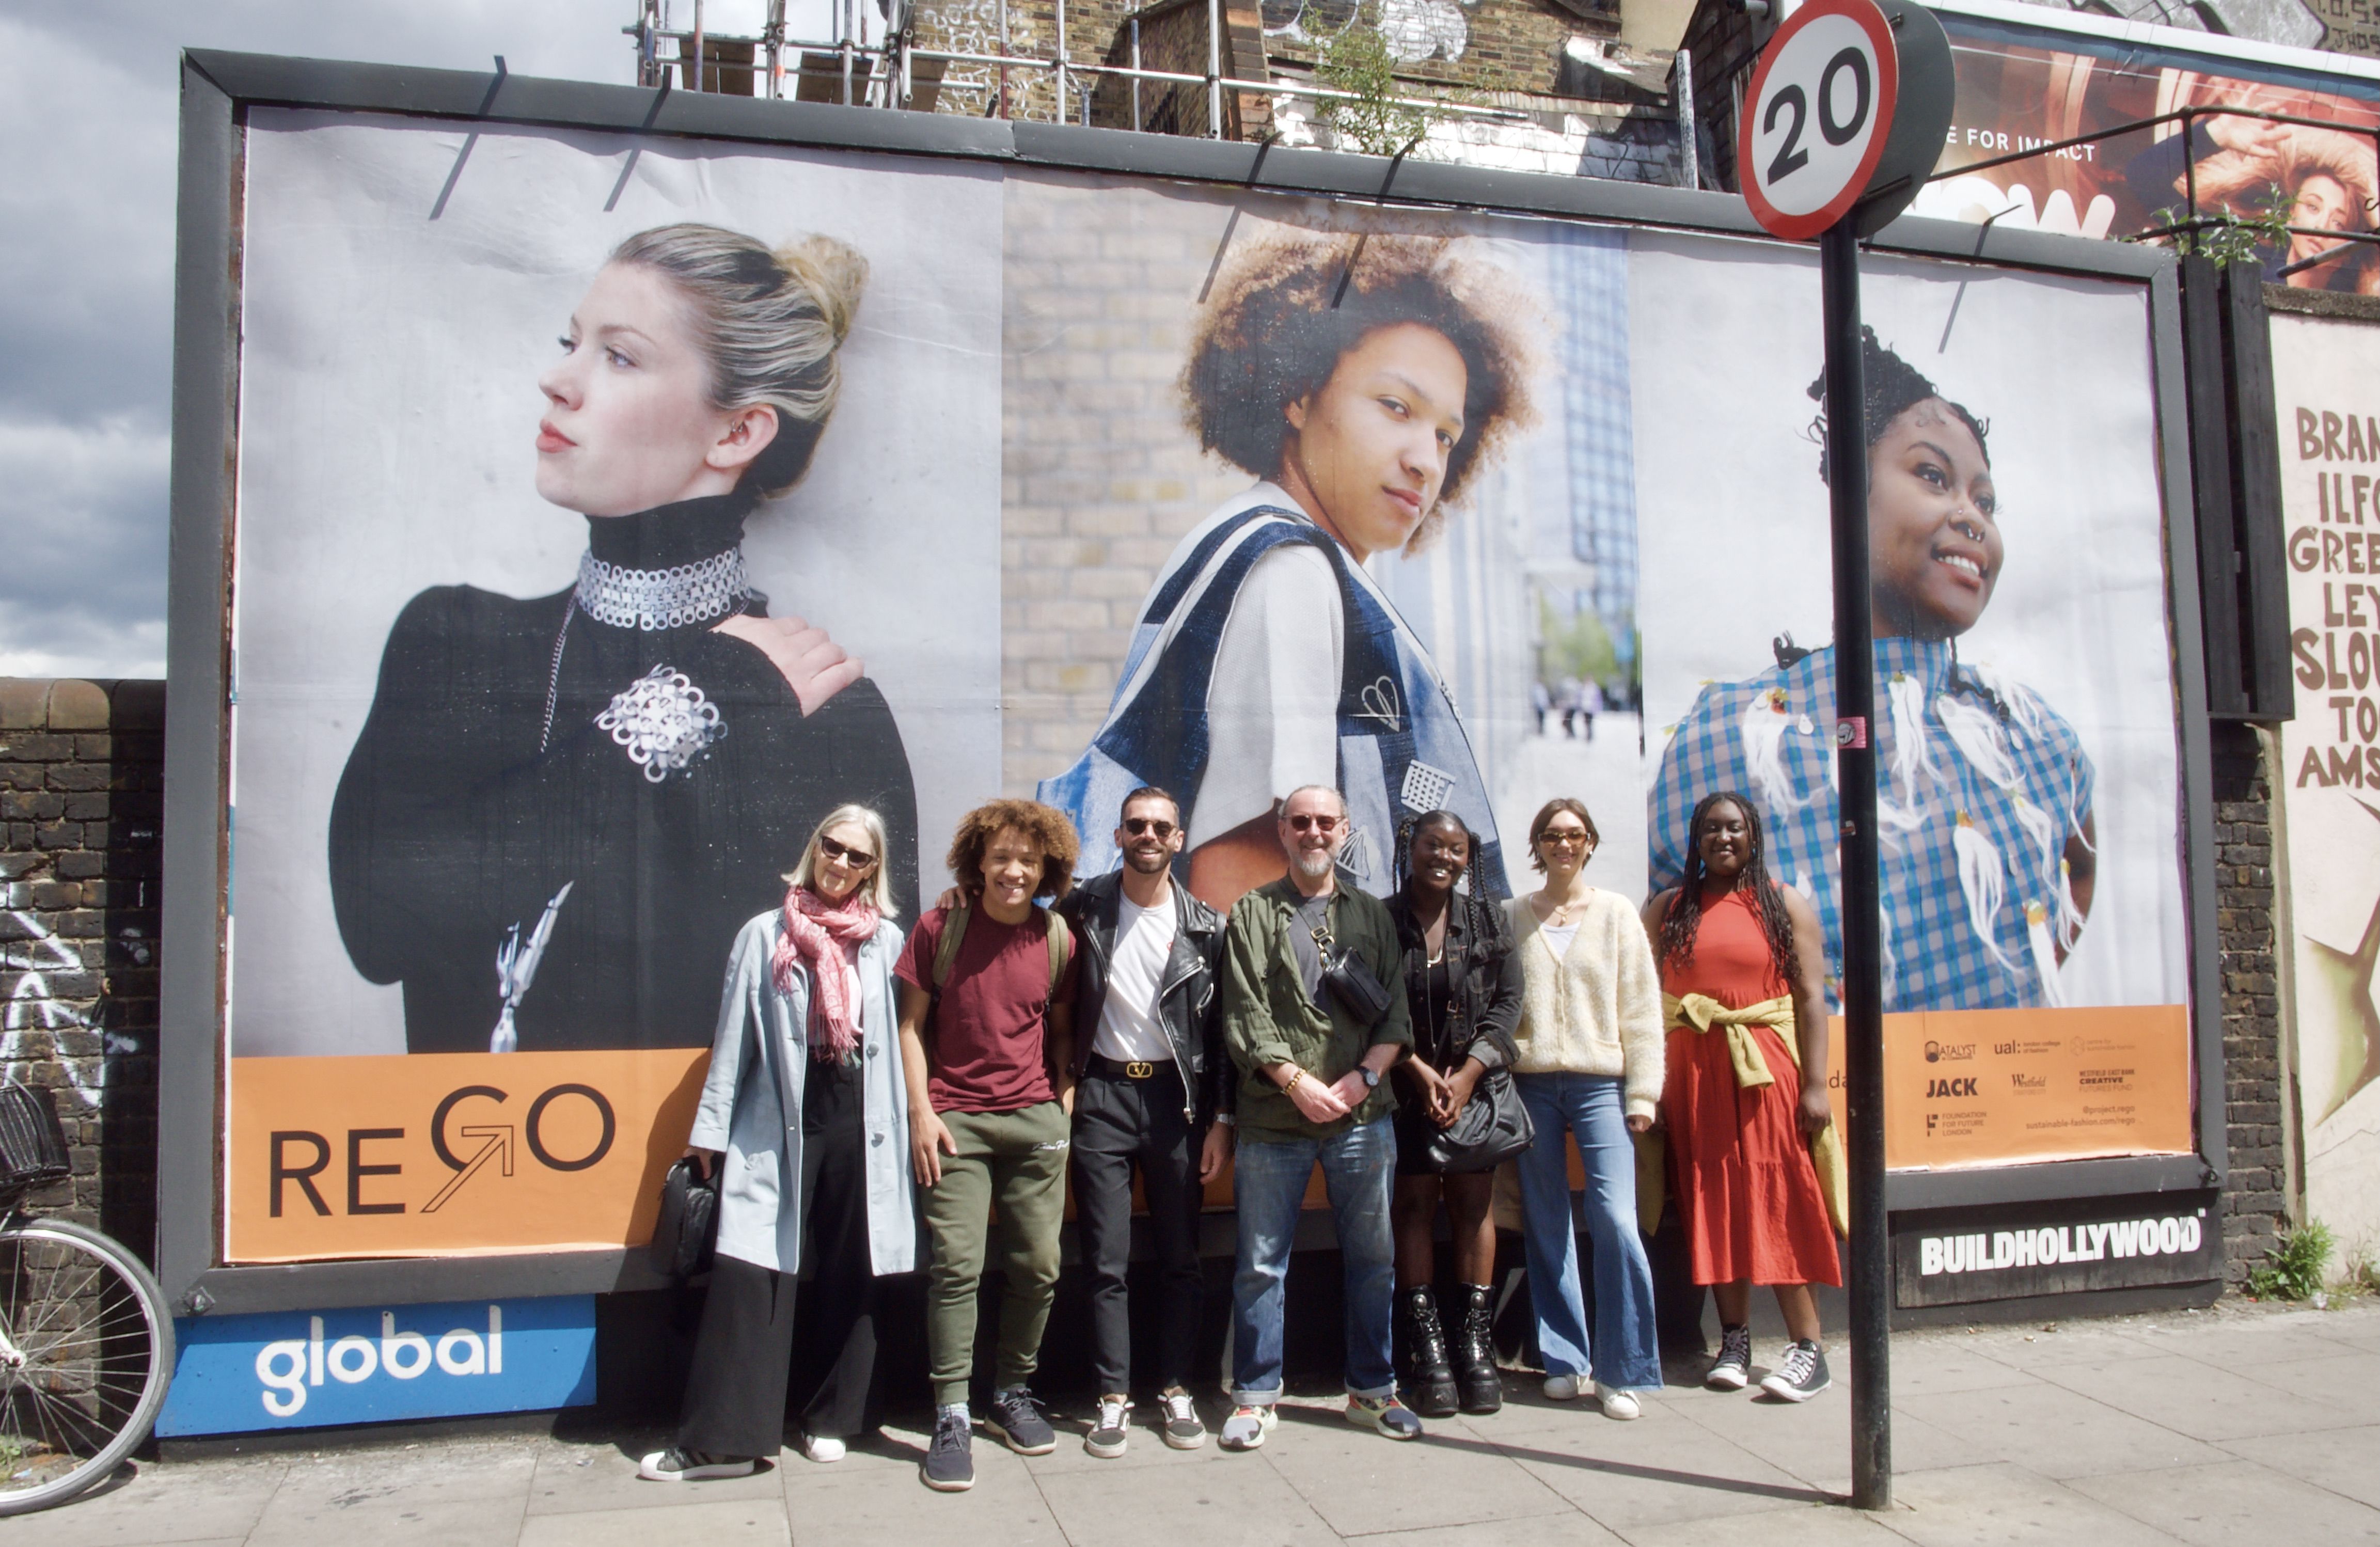 A group of people posing in front of a street billboard